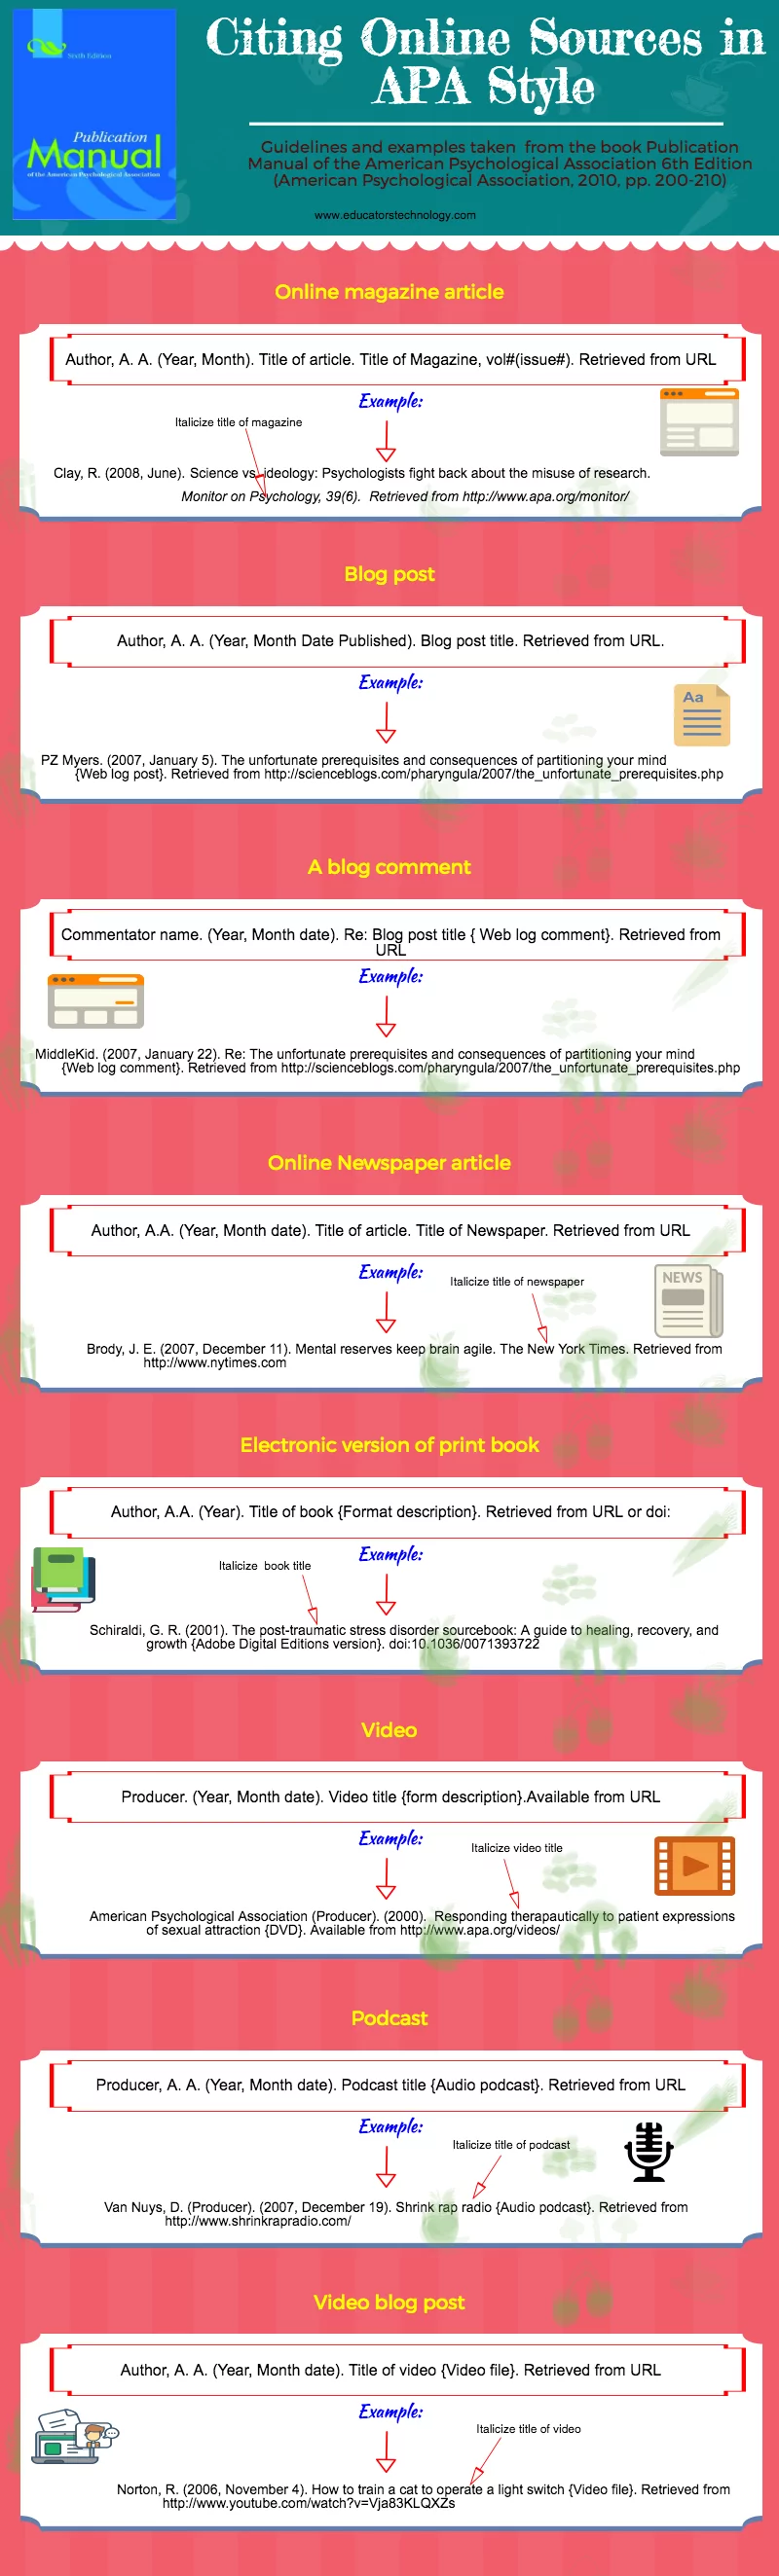 An Interesting Visual on How to Cite Online Sources in APA Style